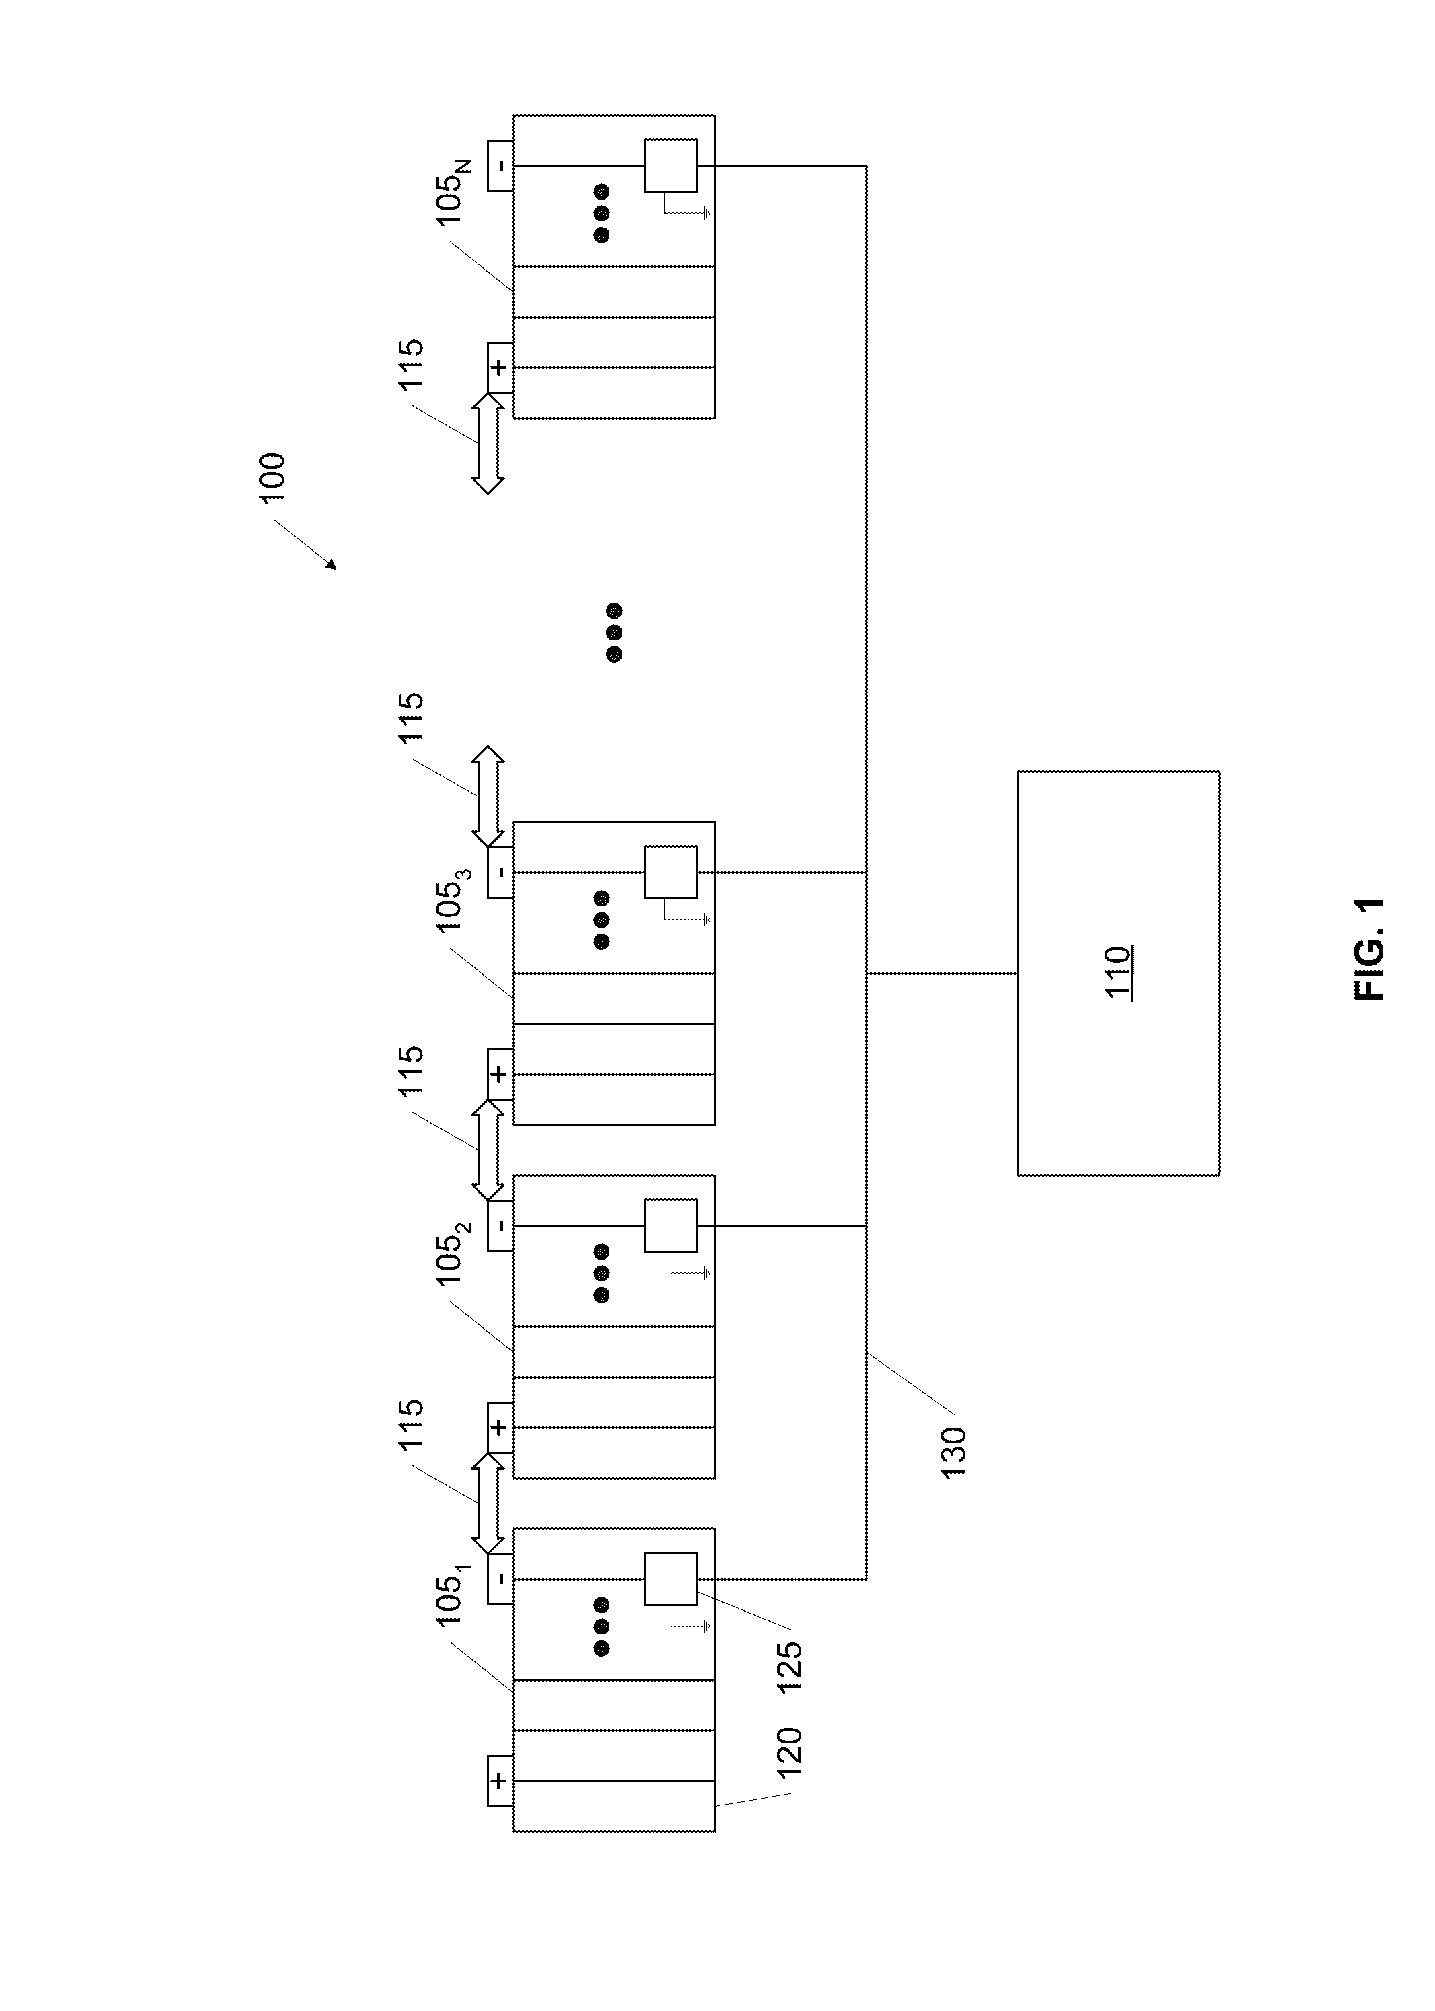 Common mode voltage enumeration in a battery pack